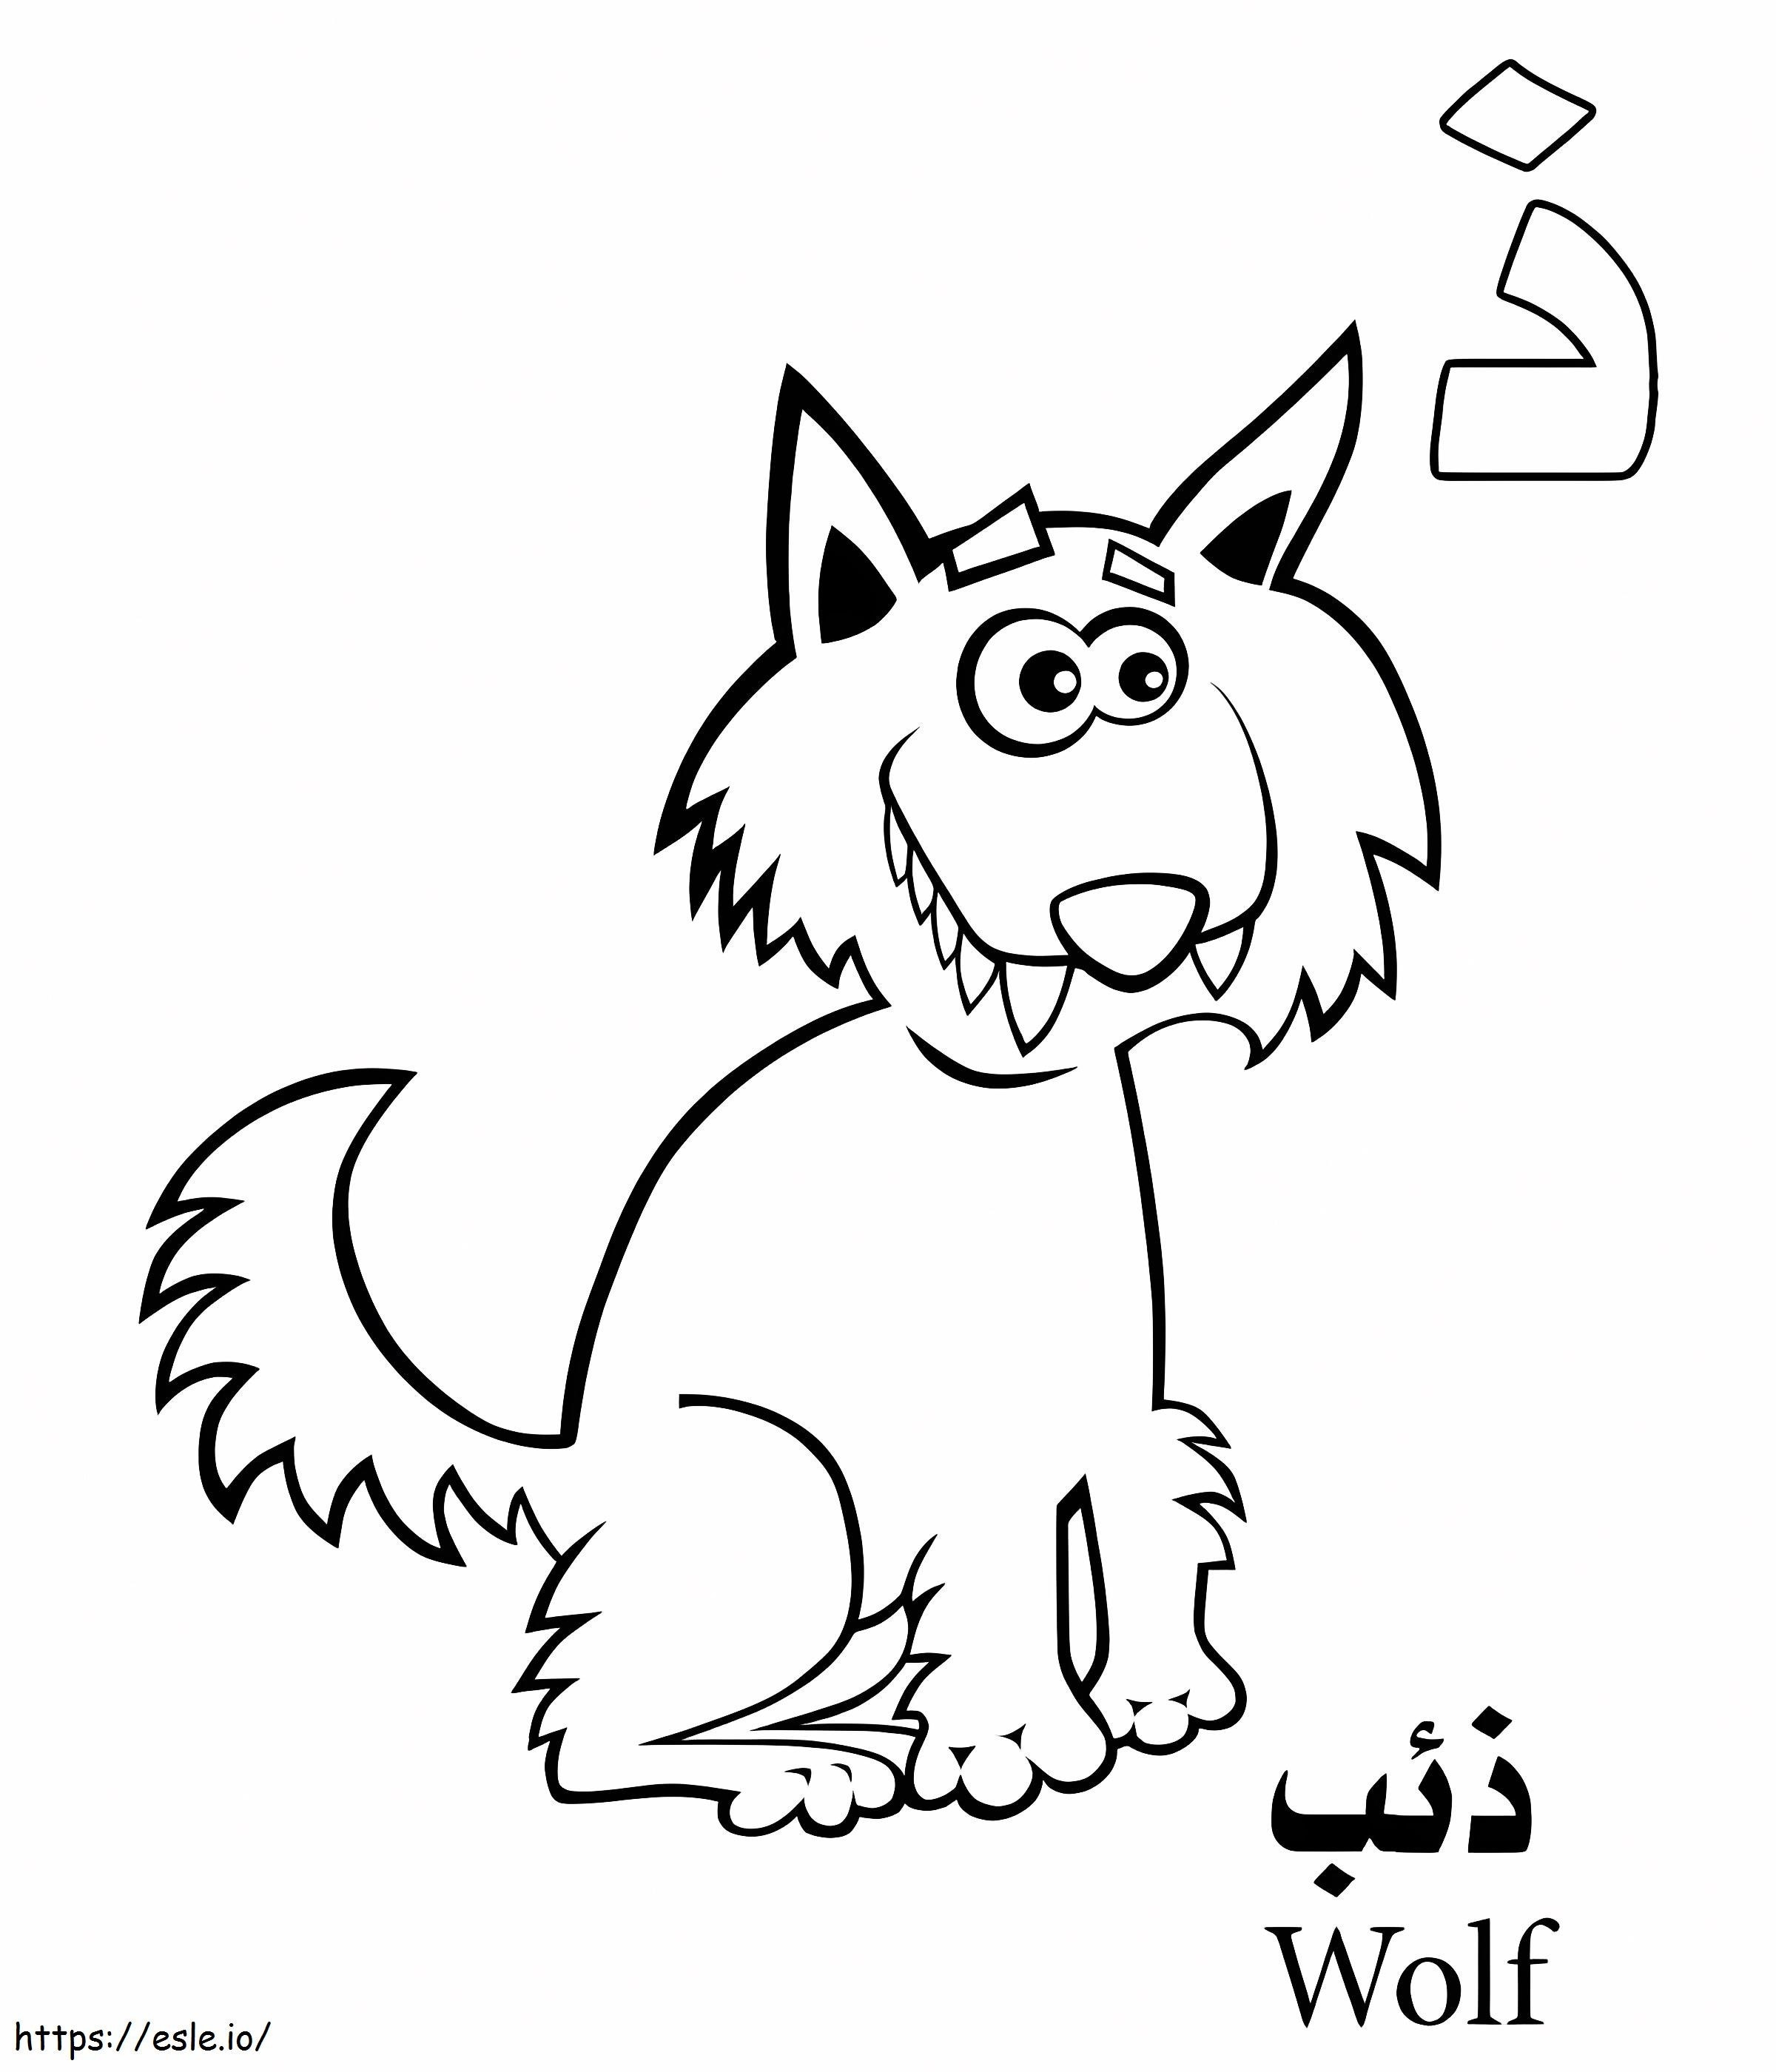 Wolf Arabic Alphabet coloring page